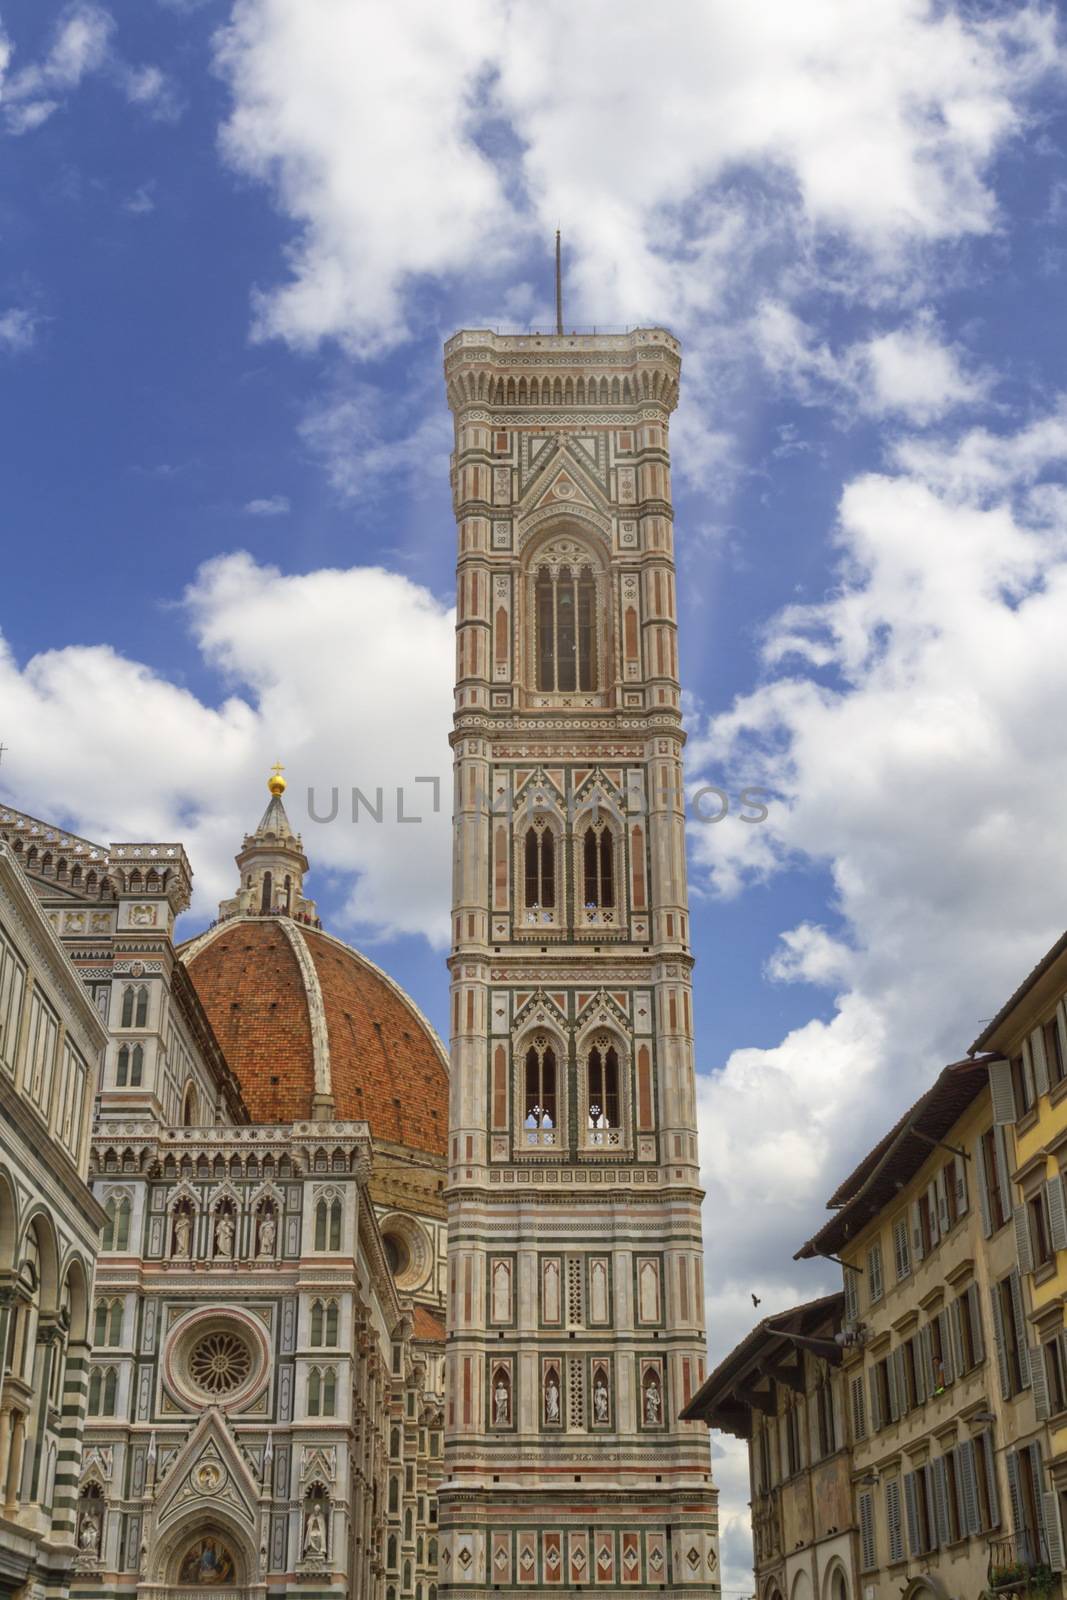 Cathedral of Santa Maria del Fiore and Giotto's Bell Tower in Florence, Italy by Elenaphotos21